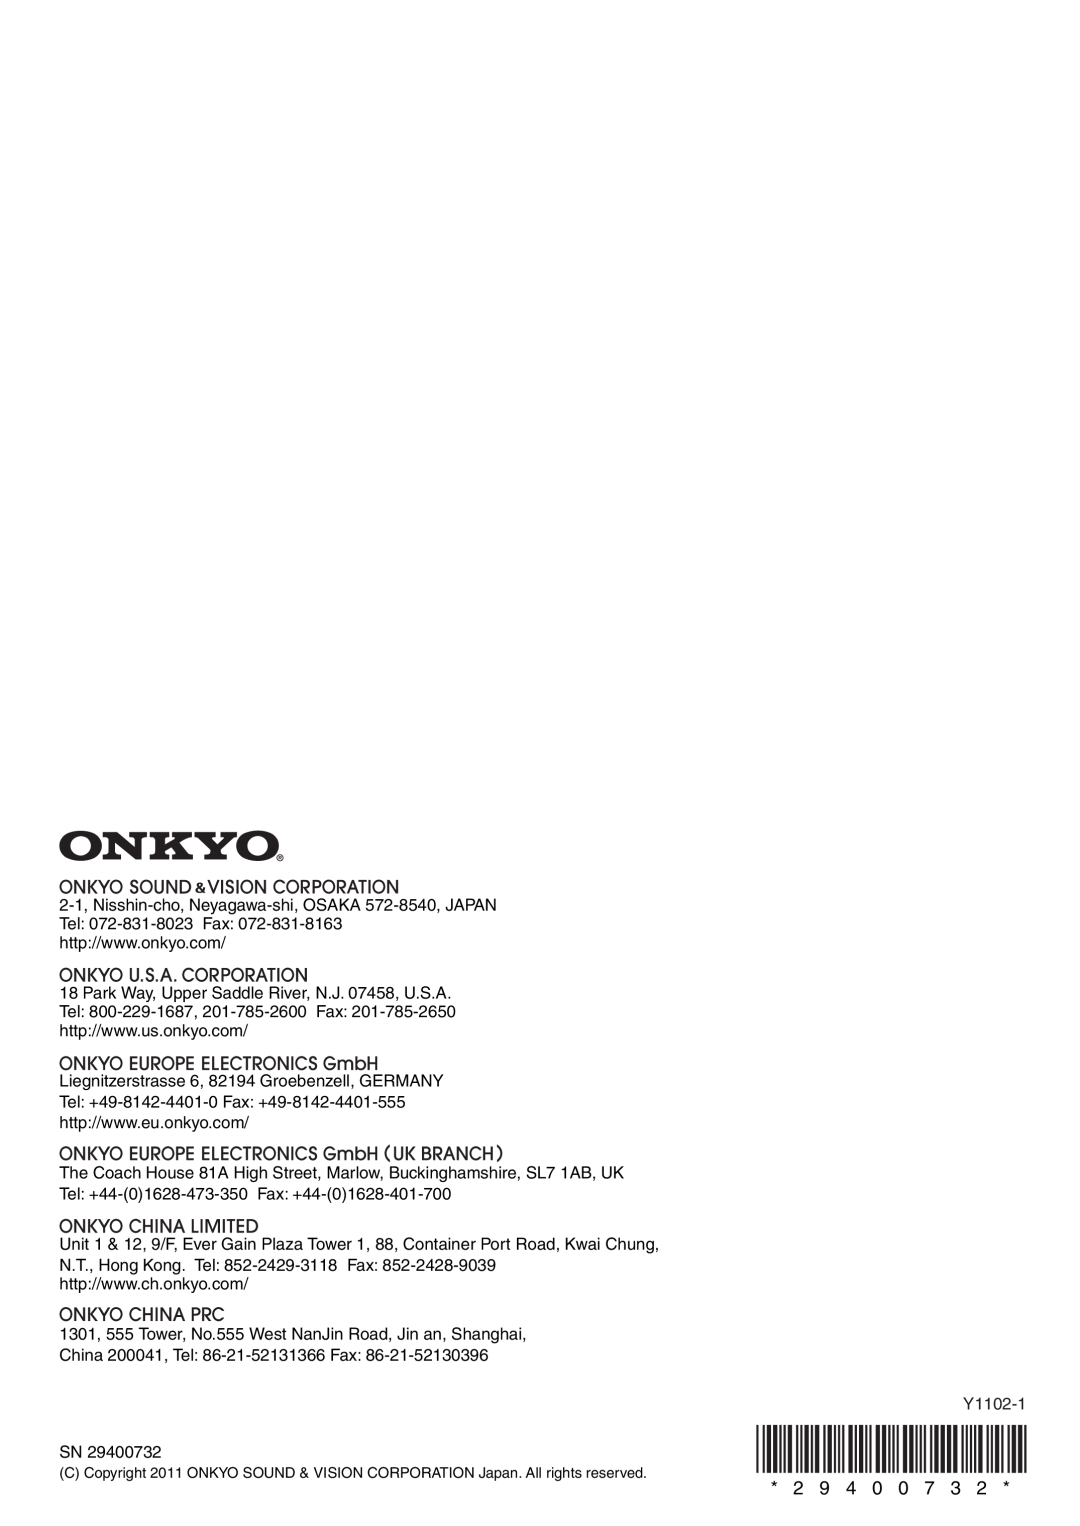 Onkyo HT-RC370 instruction manual 2 9 4 0 0 7 3, Liegnitzerstrasse 6, 82194 Groebenzell, GERMANY 